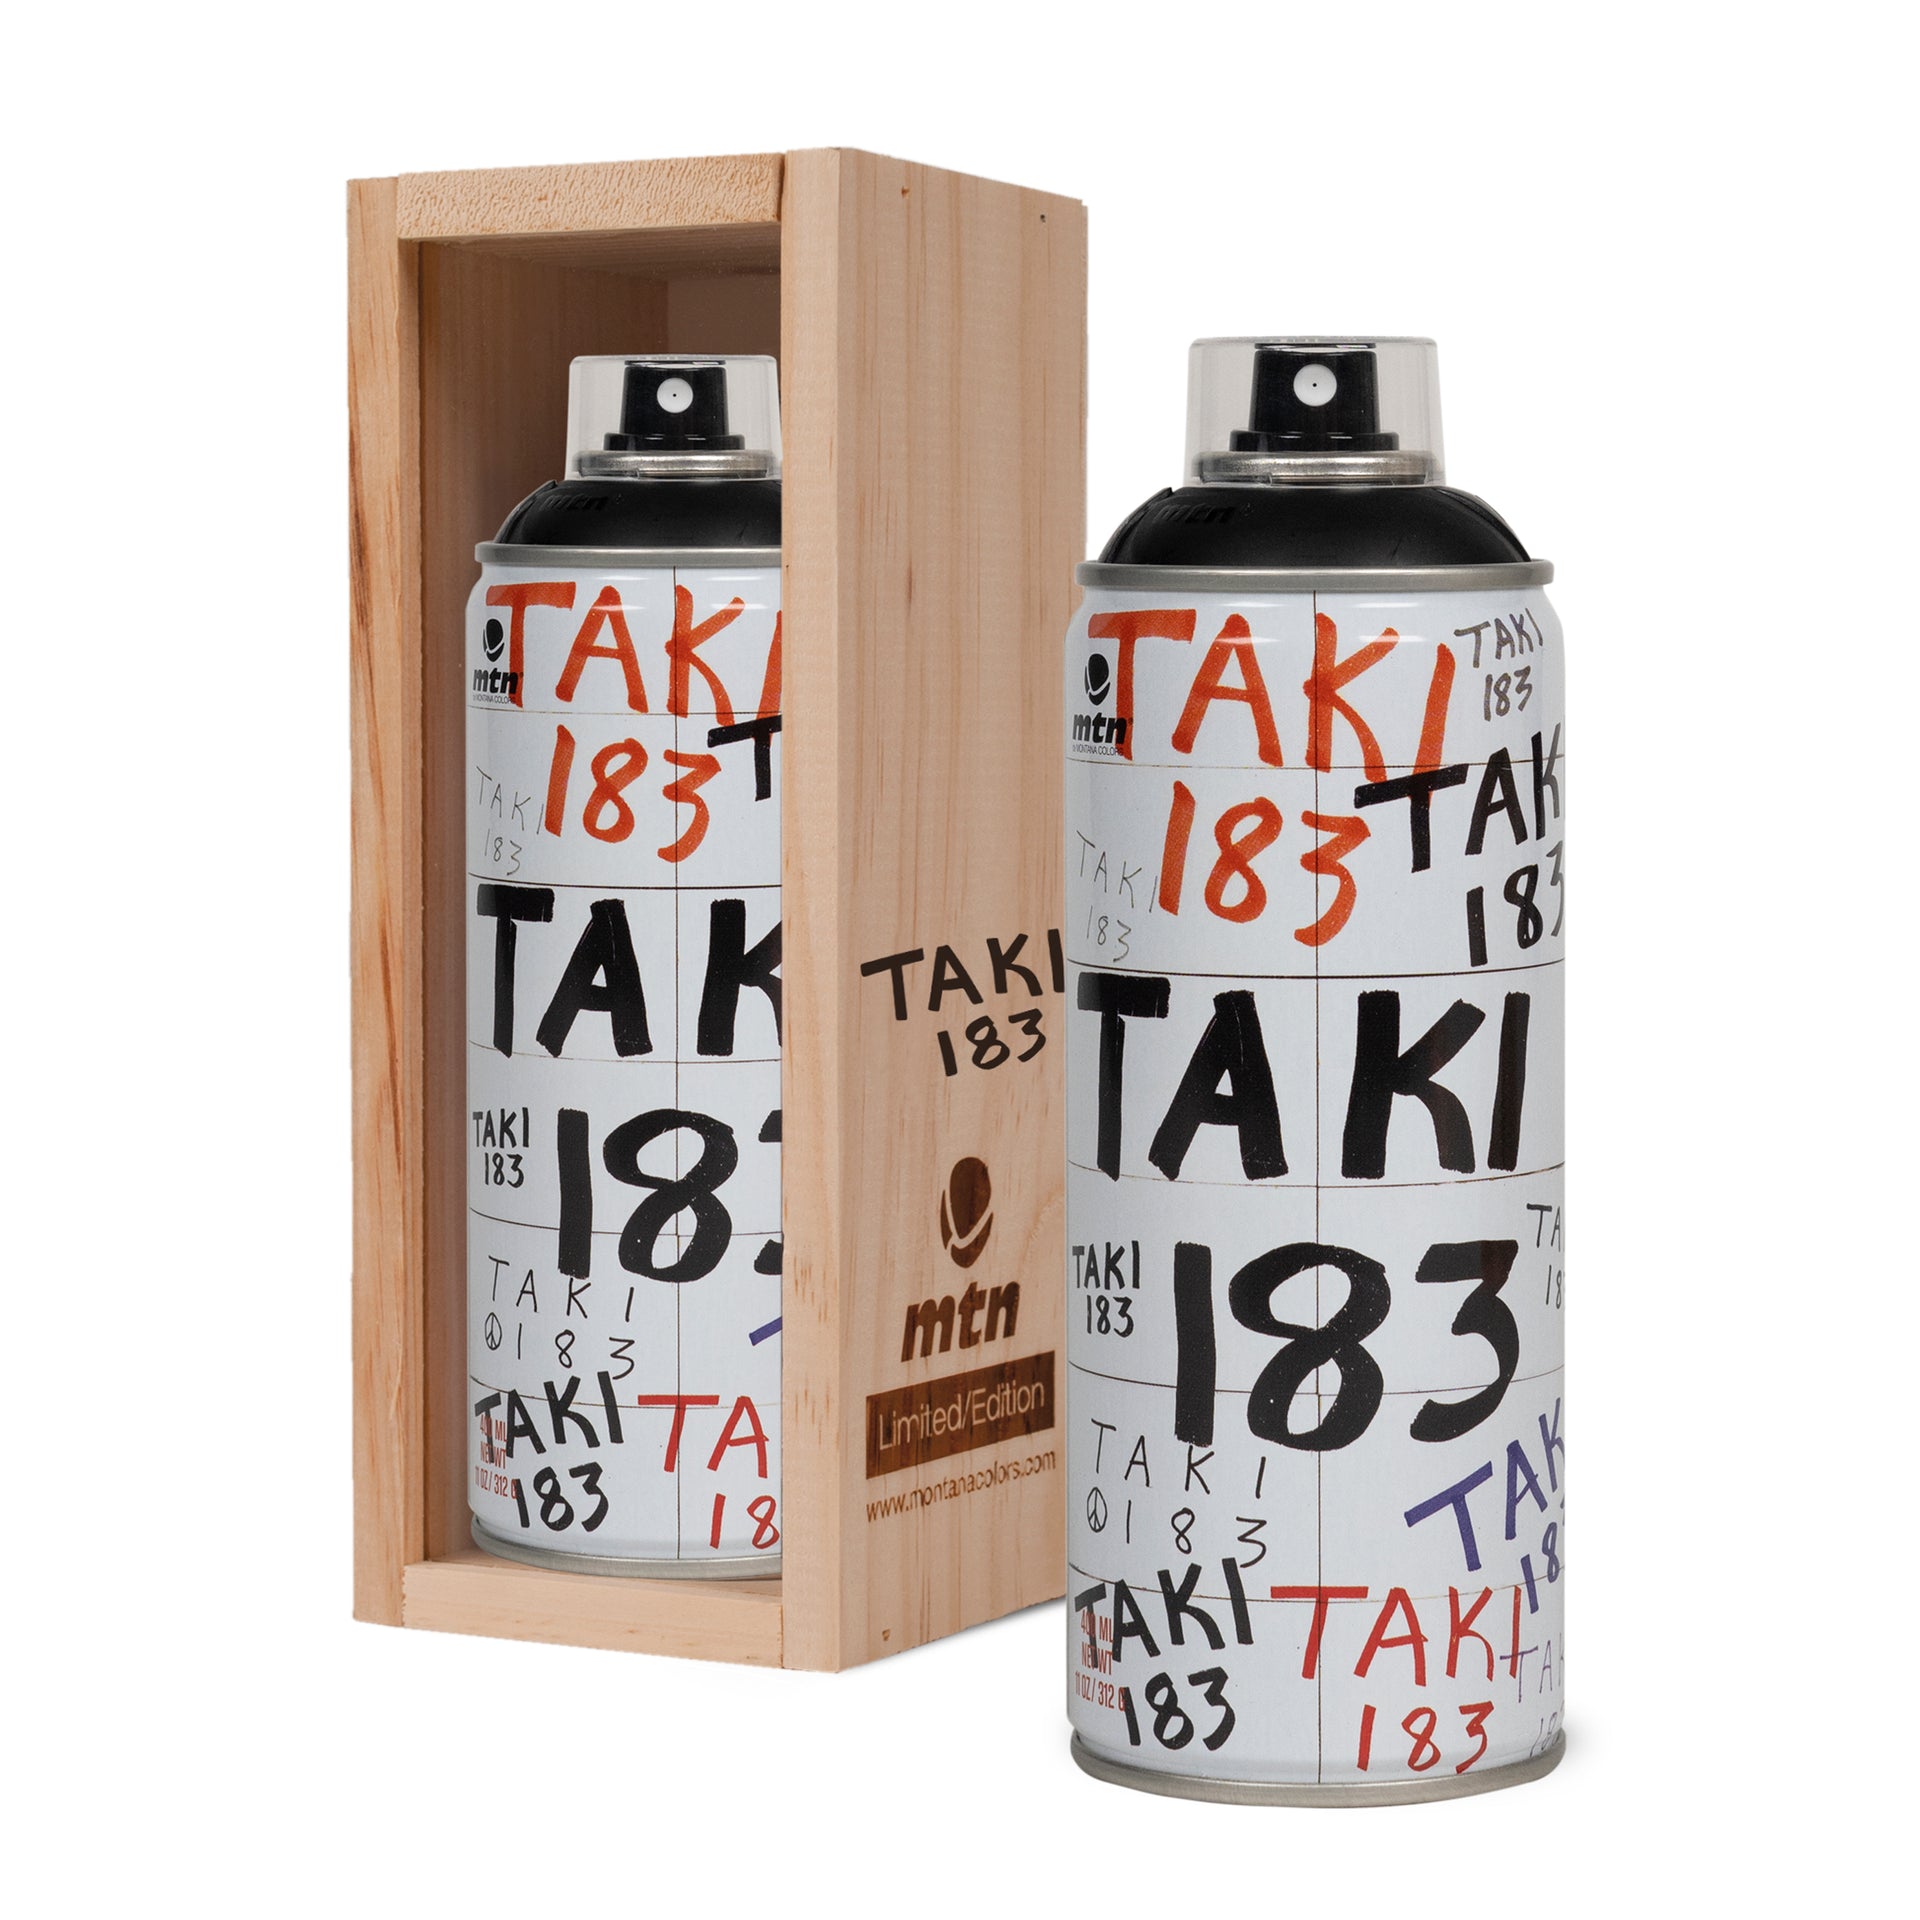 bal Gespecificeerd dier TAKI 183 "Limited Edition MTN Spray Paint Can" - BEYOND THE STREETS